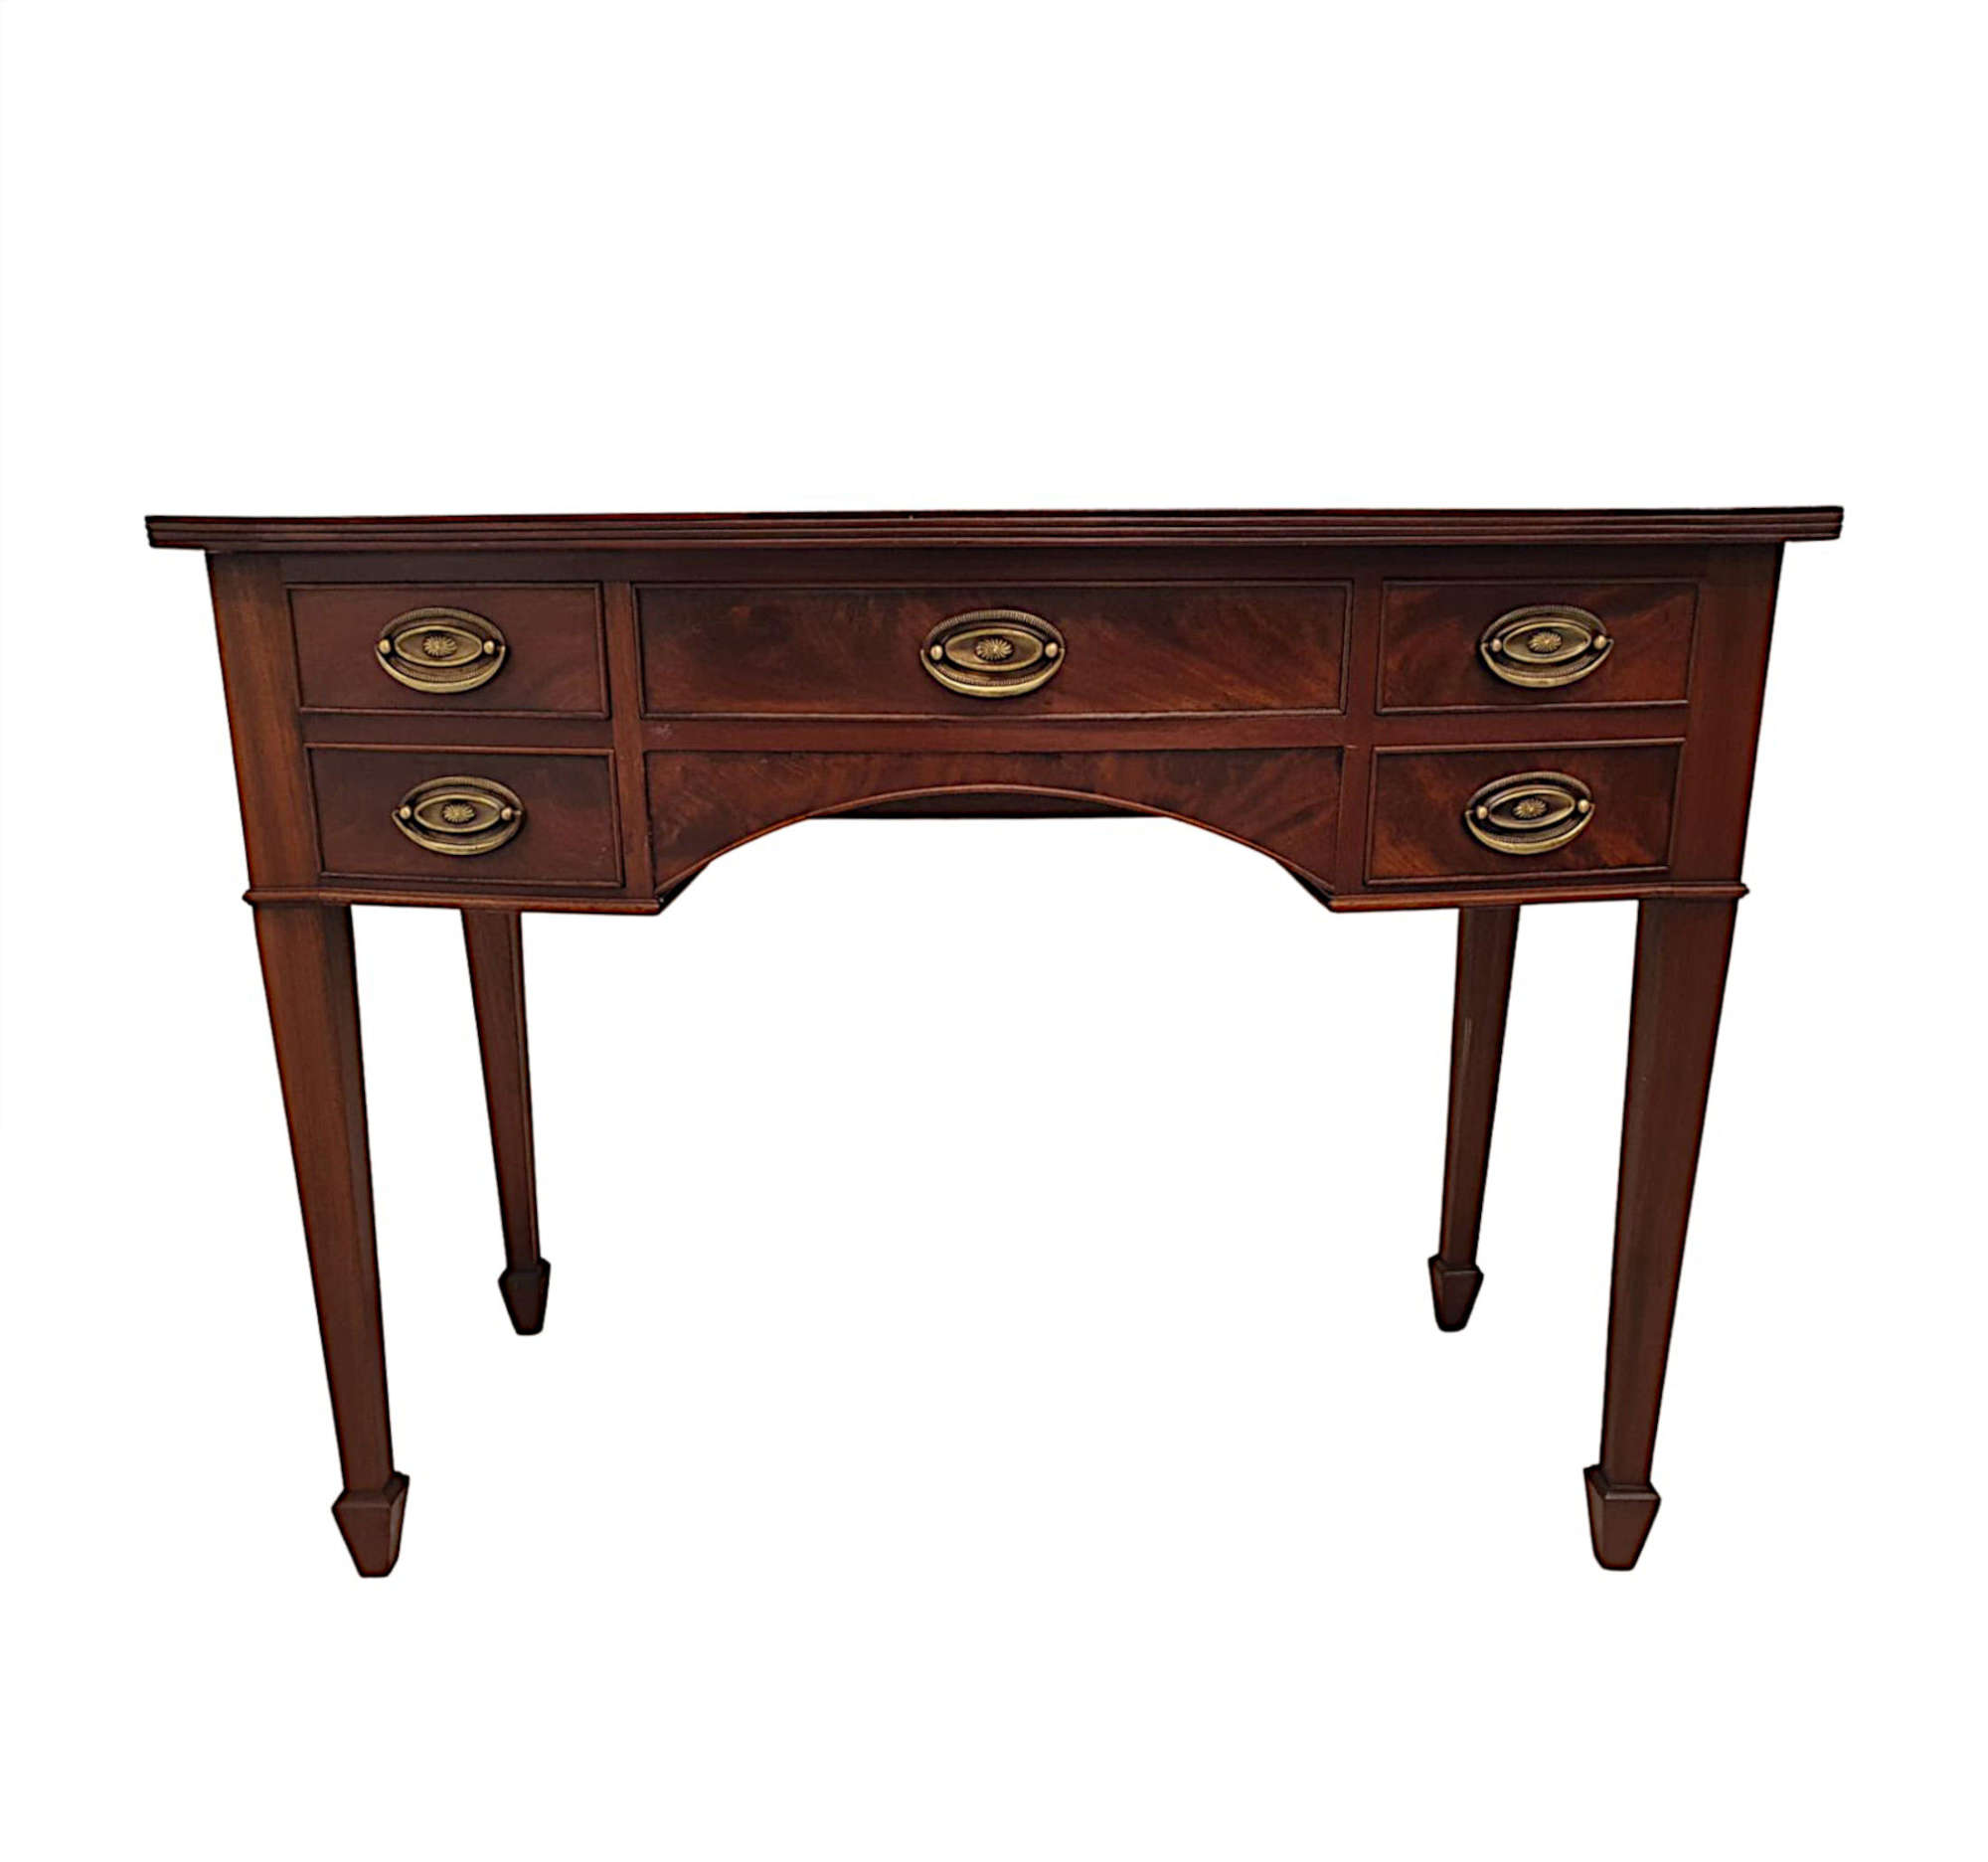 A Fabulous Edwardian Console Or Antique Hall Table